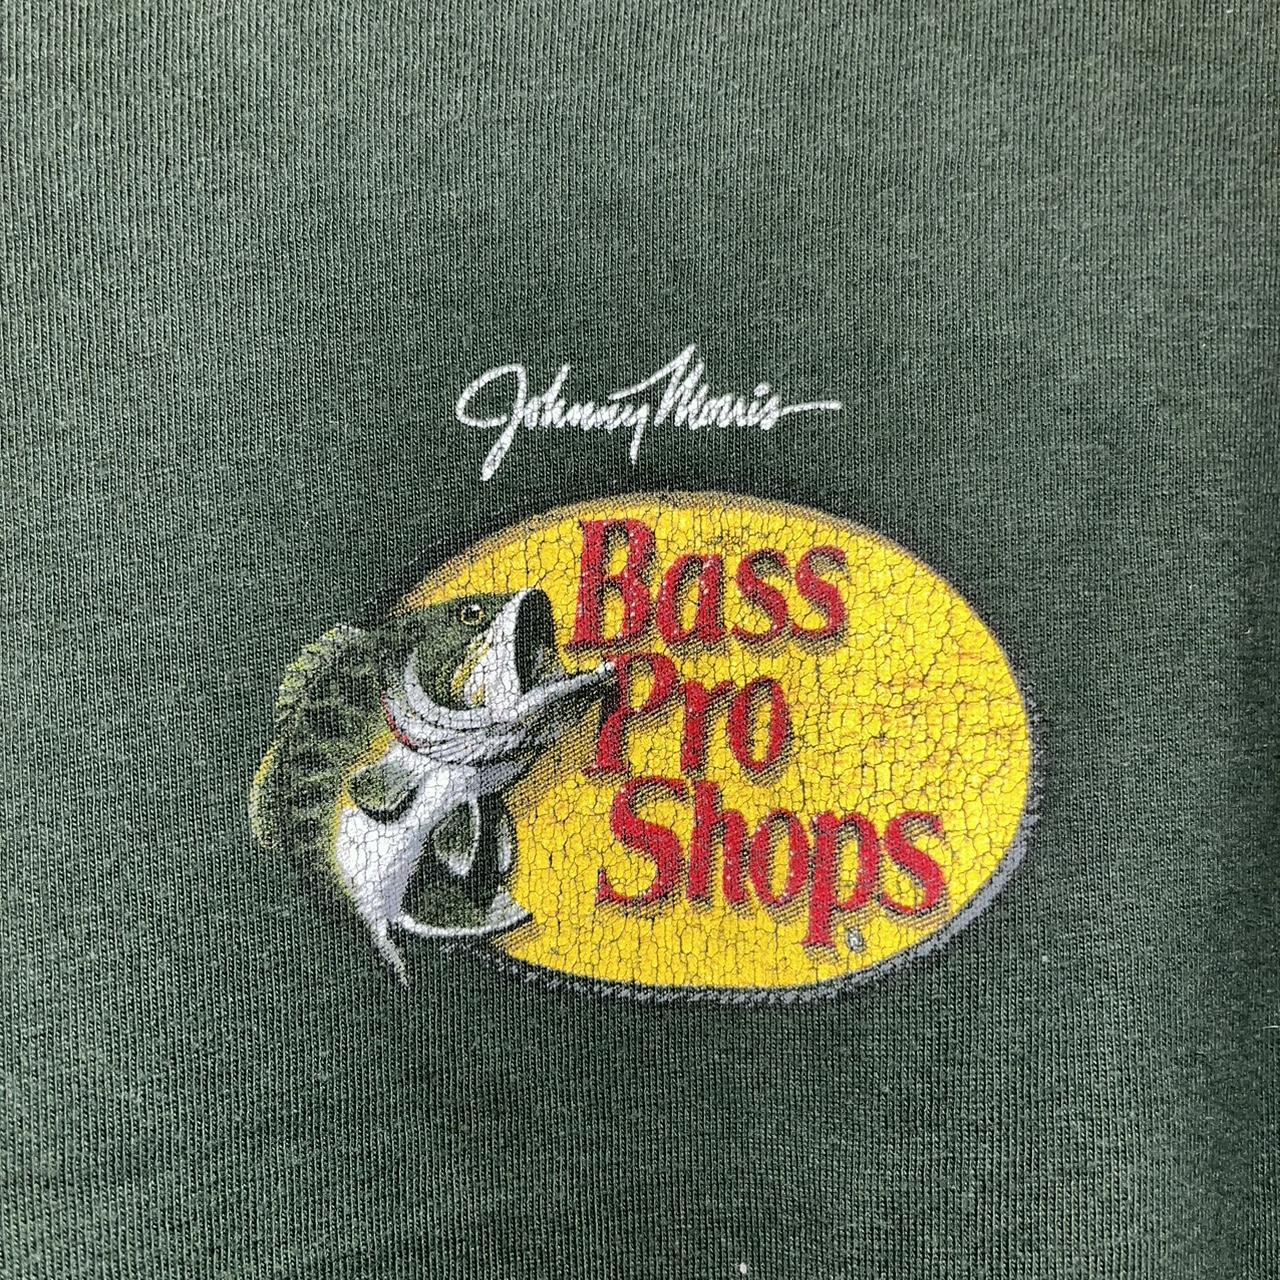 Bass pro shirt. Vintage look. Long sleeve fit, about... - Depop